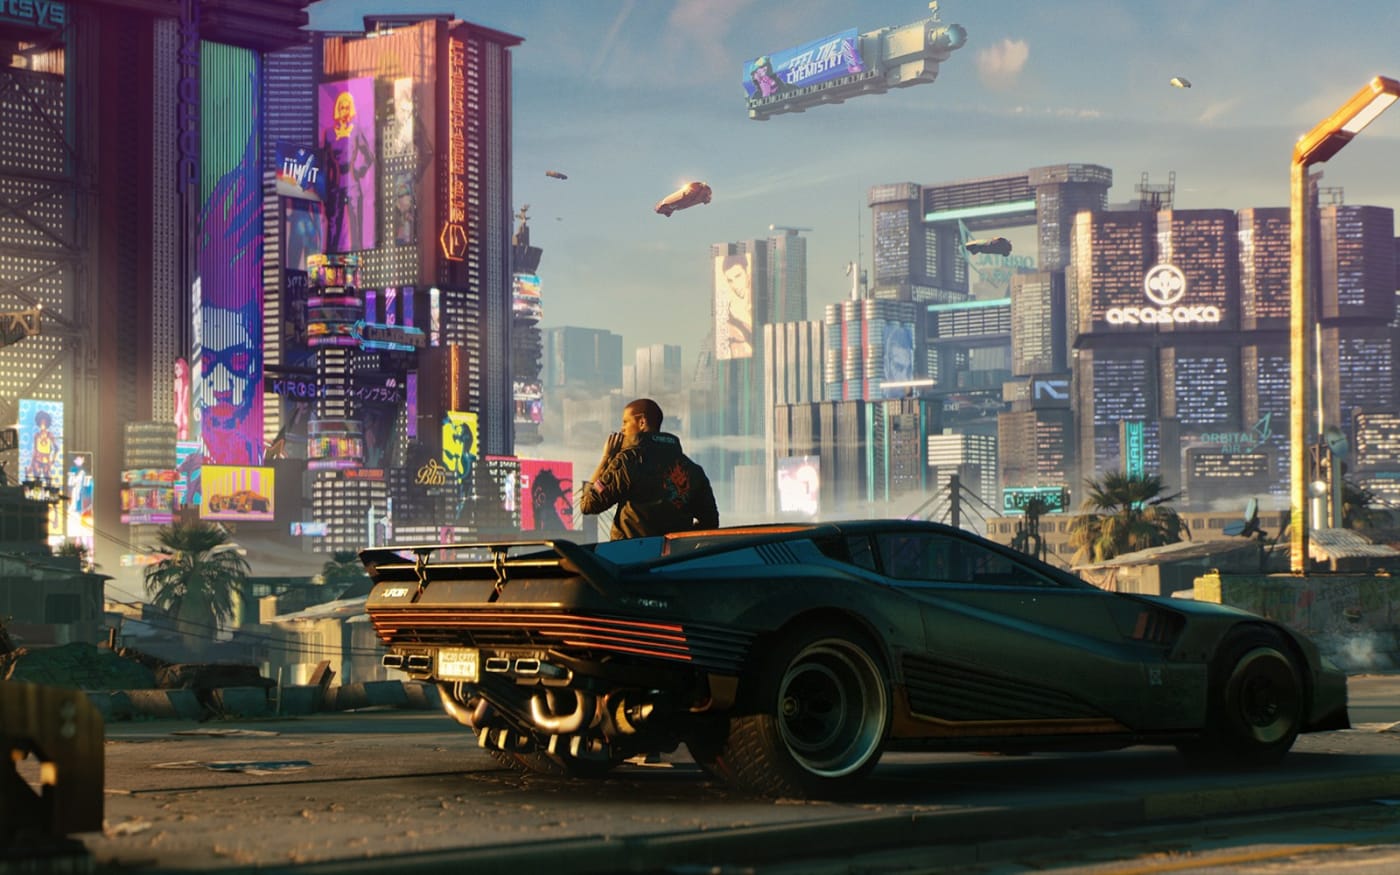 Cyberpunk 2077 will have a free trial on PS5 and Xbox Series X/S this weekend